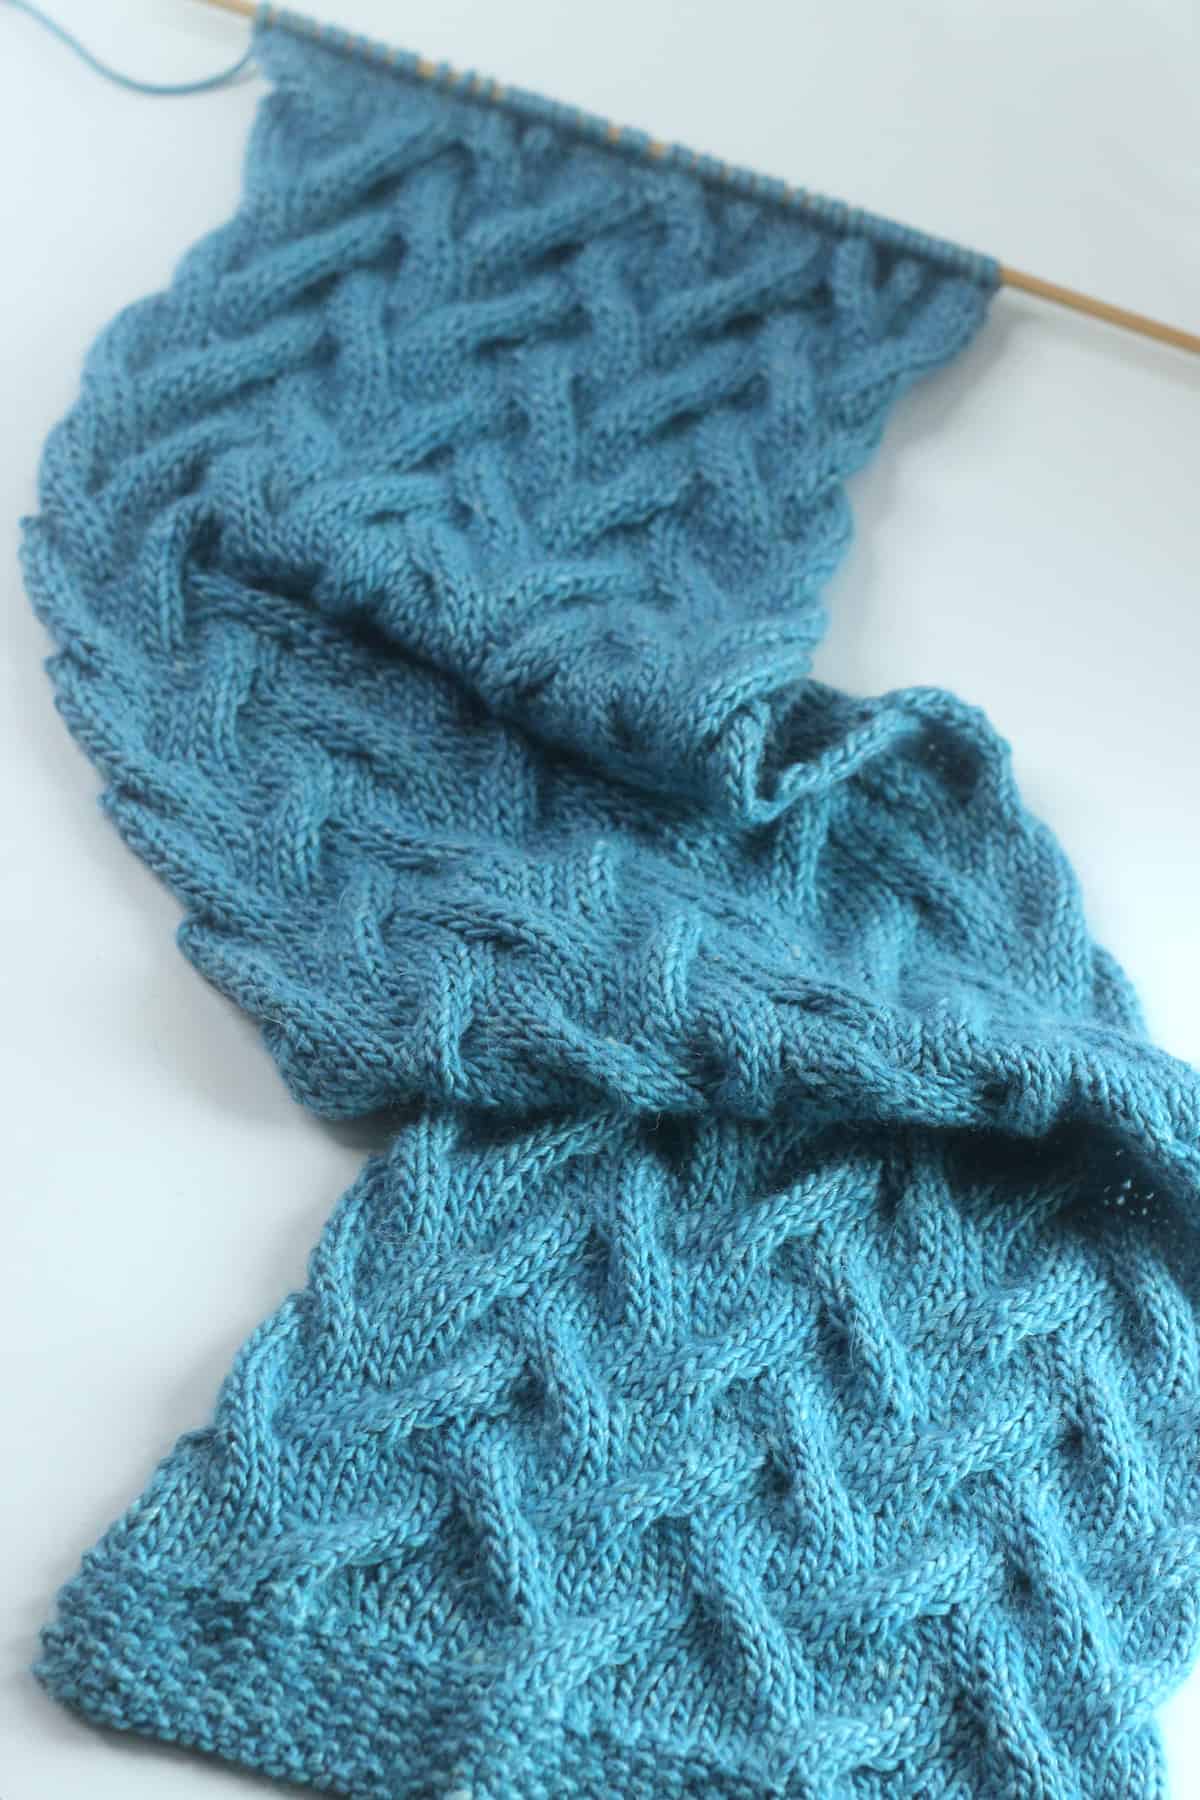 Long scarf in Sand Cable knit stitch pattern knitted flat with a straight knitting needle in blue yarn color.